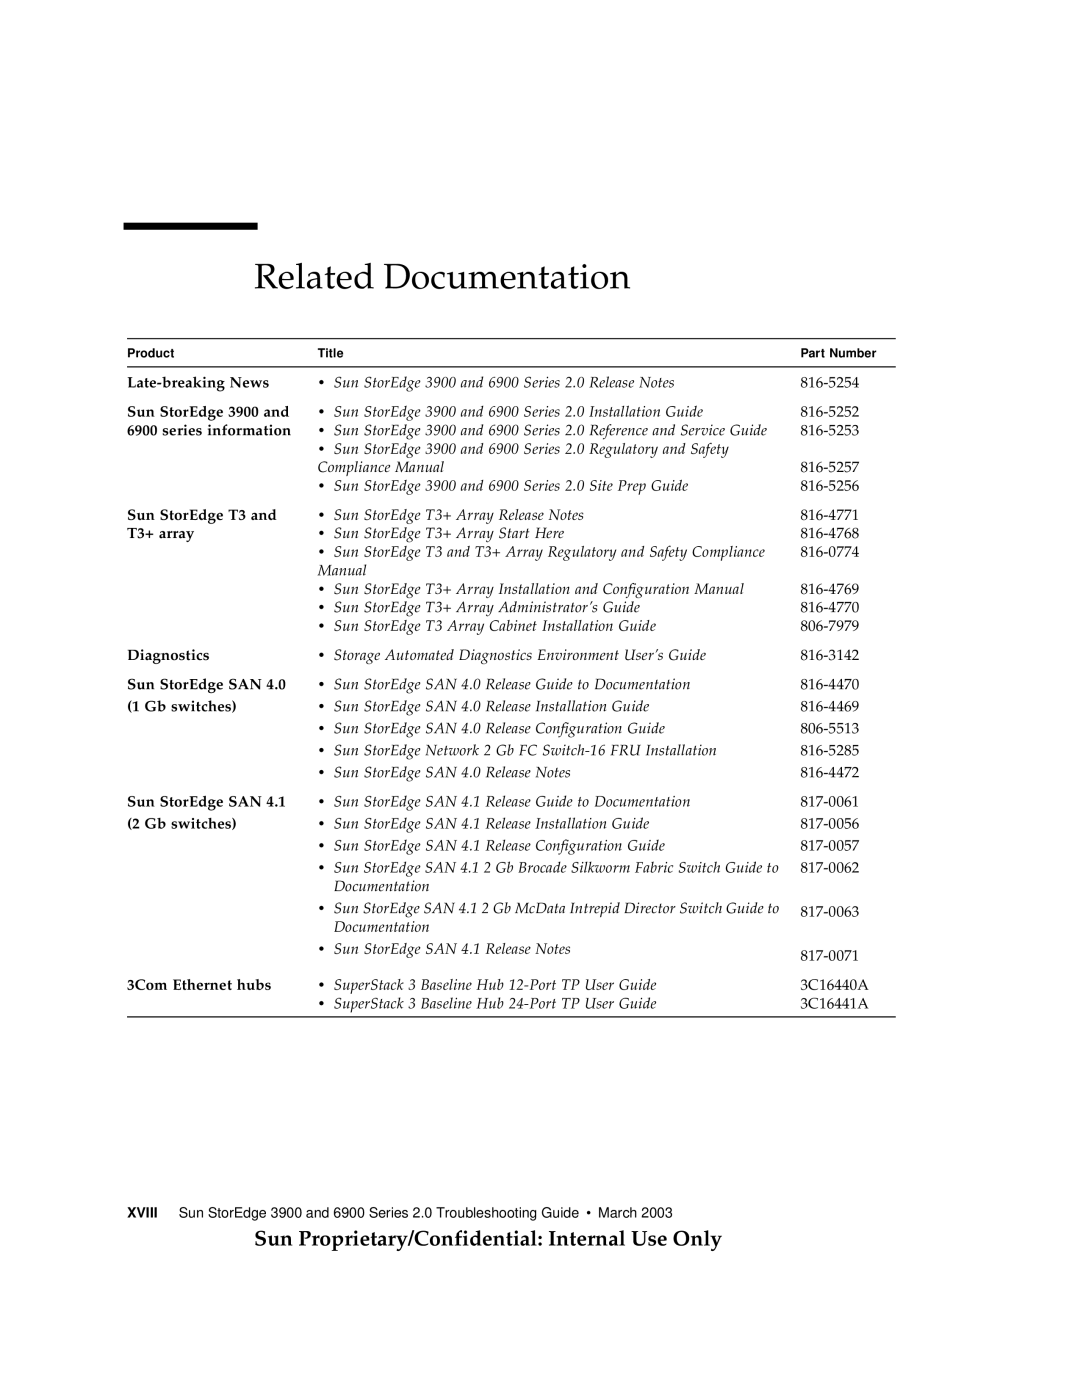 Sun Microsystems 3900 Related Documentation, Sun Proprietary/Confidential Internal Use Only, Product, Title, Part Number 